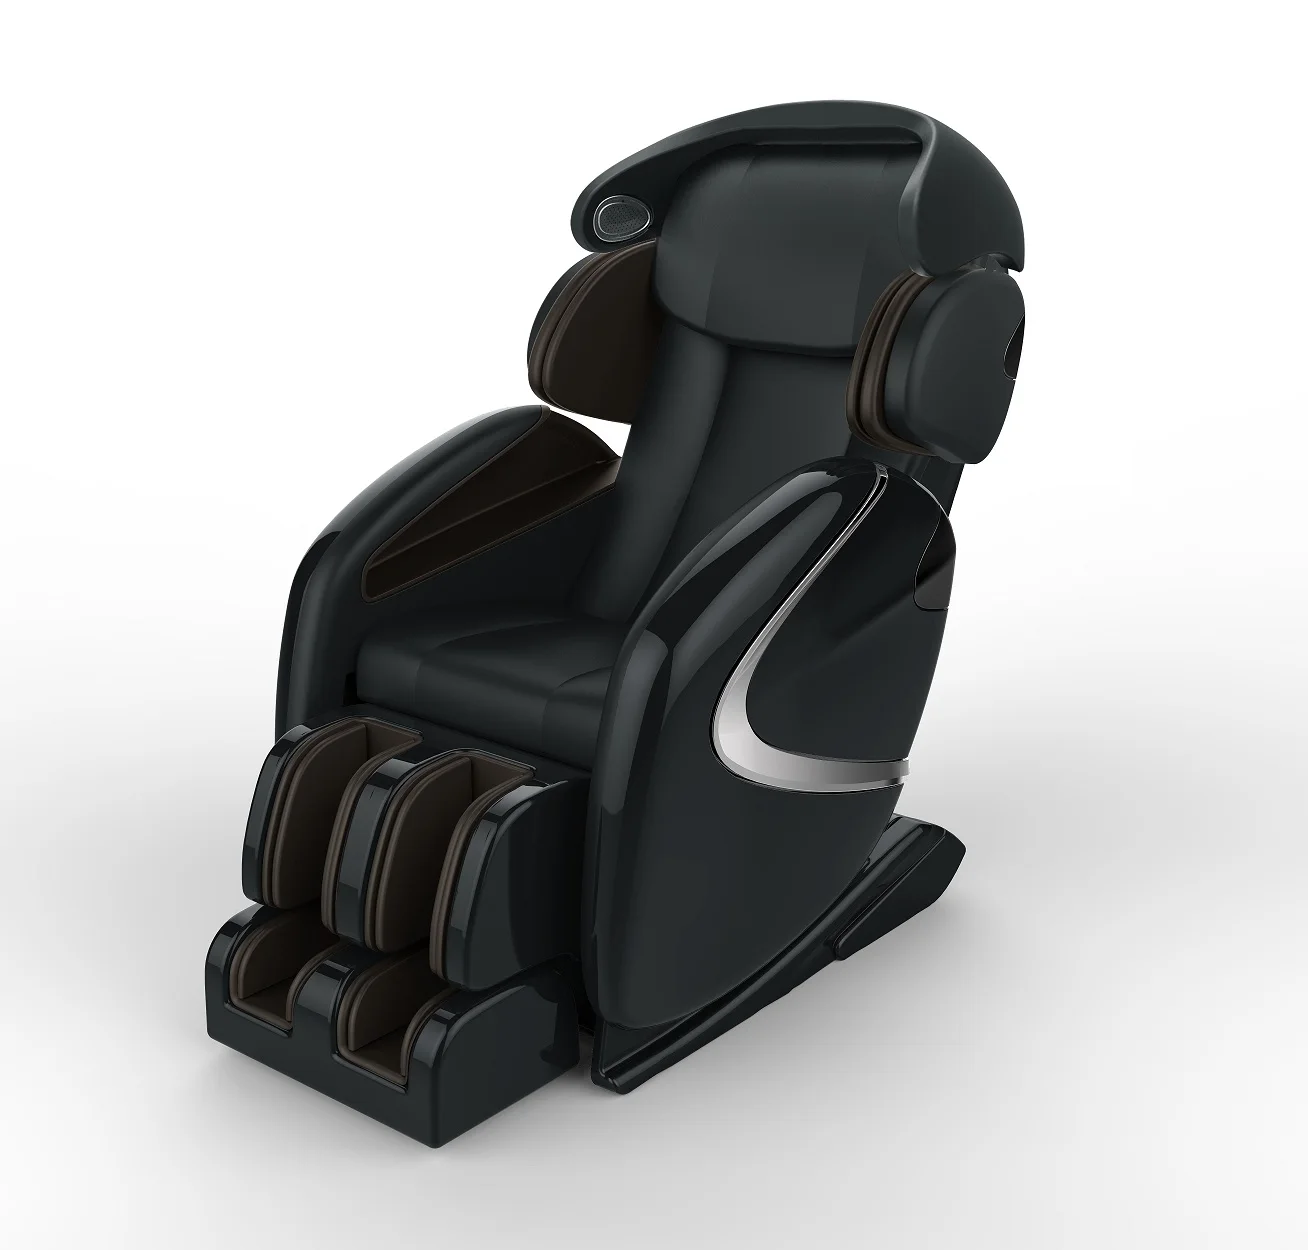 Best Massage Chair For Sale - Buy Professional For Sale Massage Chair